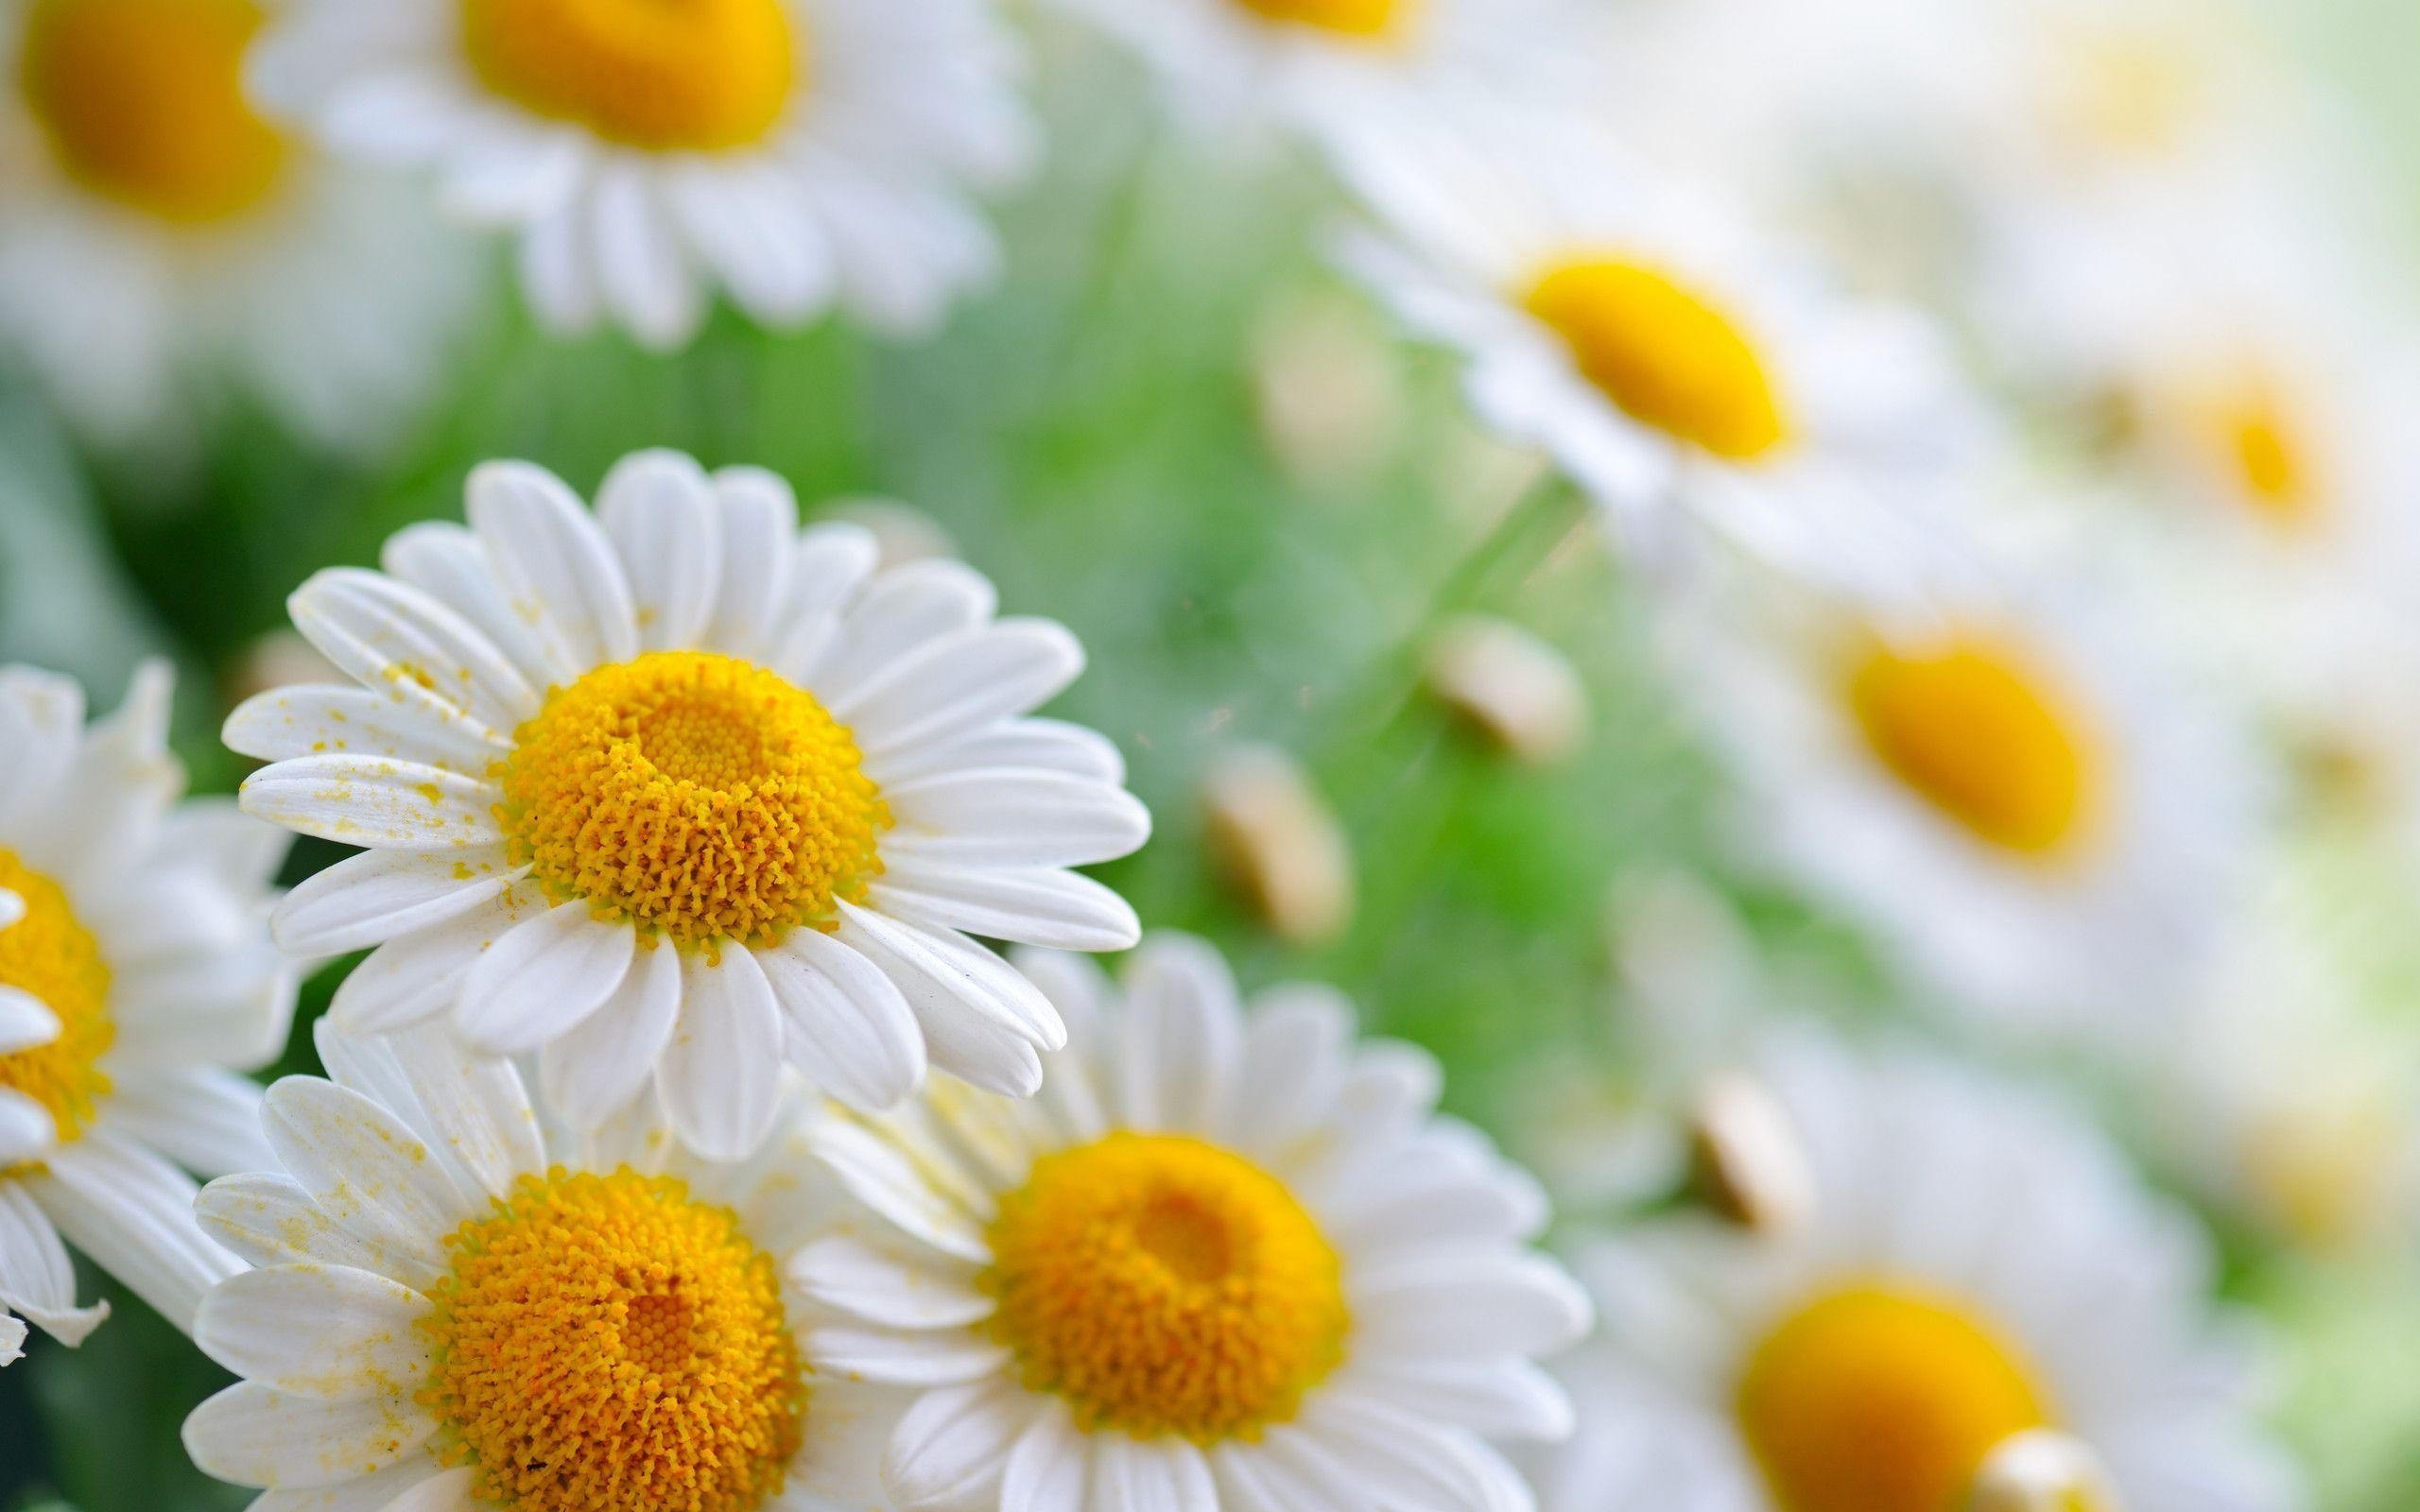 Best Daisies Backgrounds